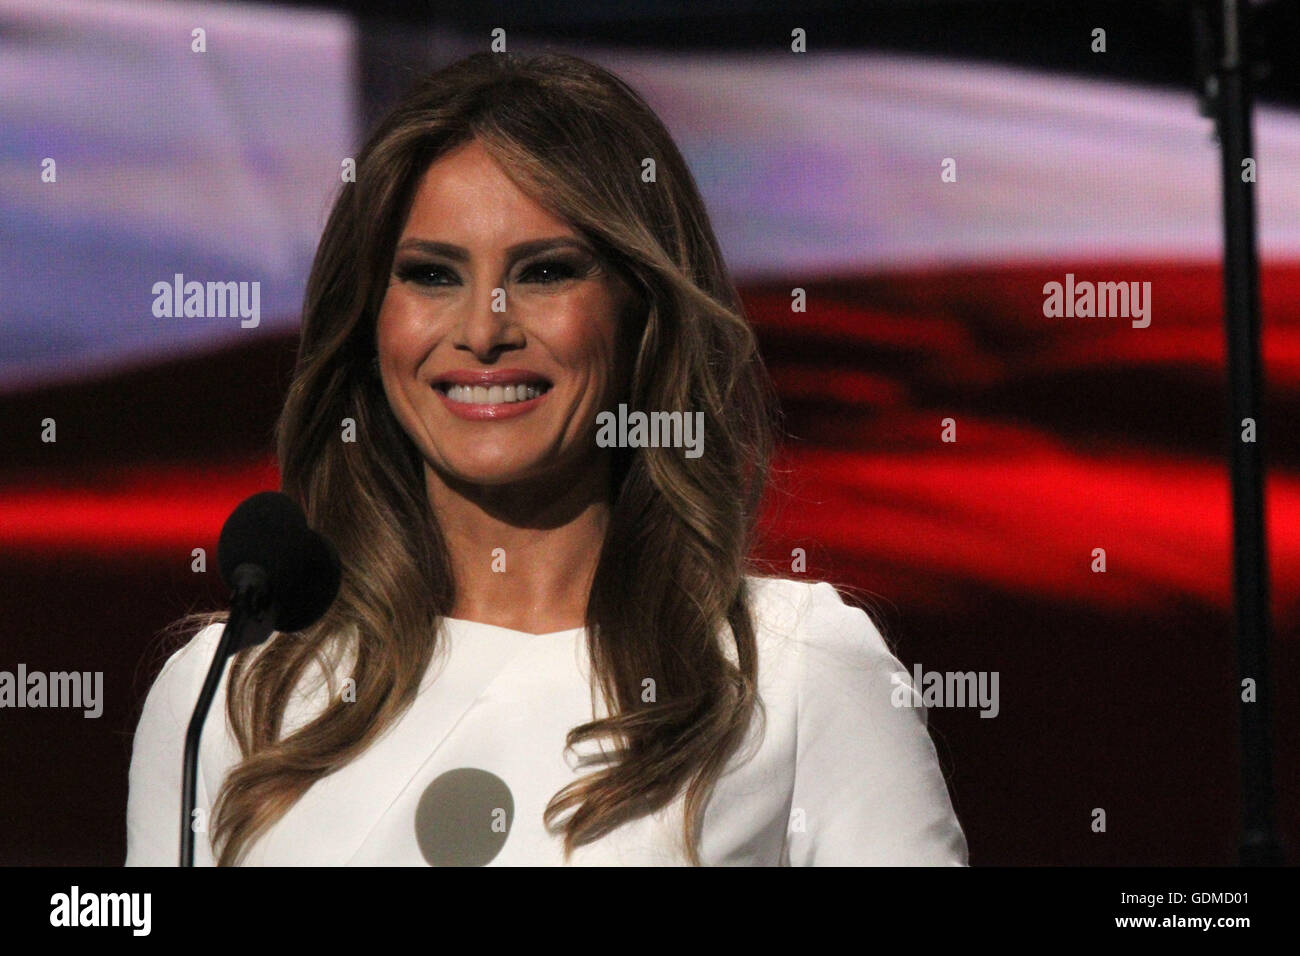 New York, New York, USA. 18th July, 2016. Day 1 of the Republican National Convention held at The Quicken Arena in Cleveland Ohio. © Bruce Cotler/Globe Photos/ZUMA Wire/Alamy Live News Stock Photo